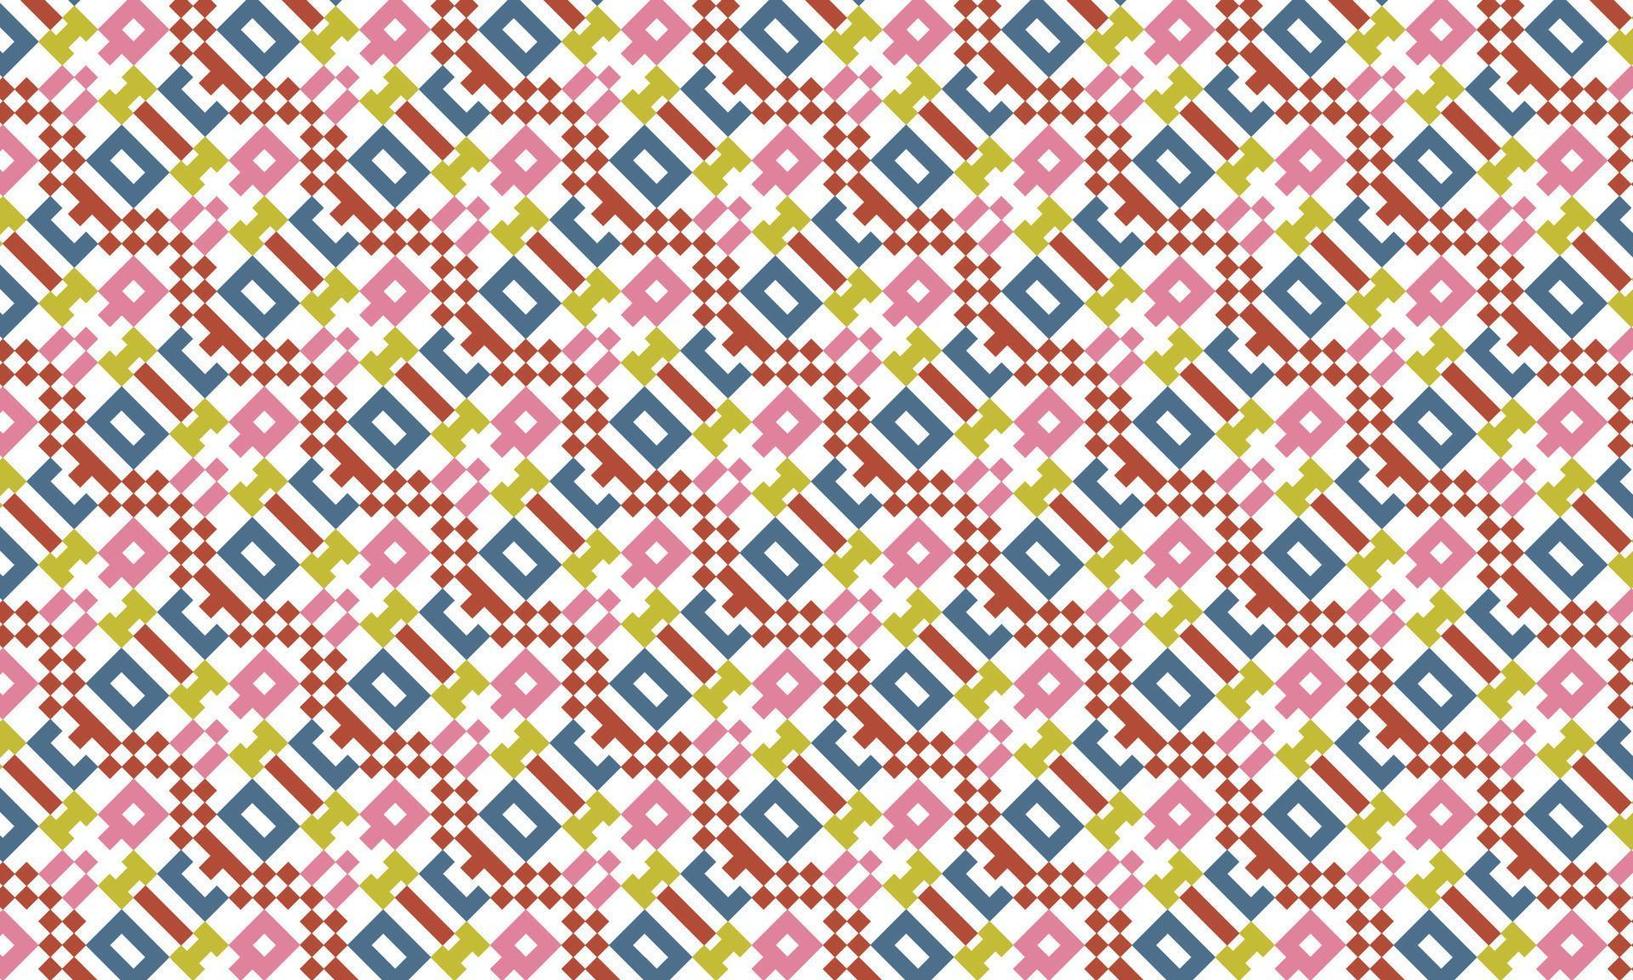 background pattern abstract ethnic modern plaid vector